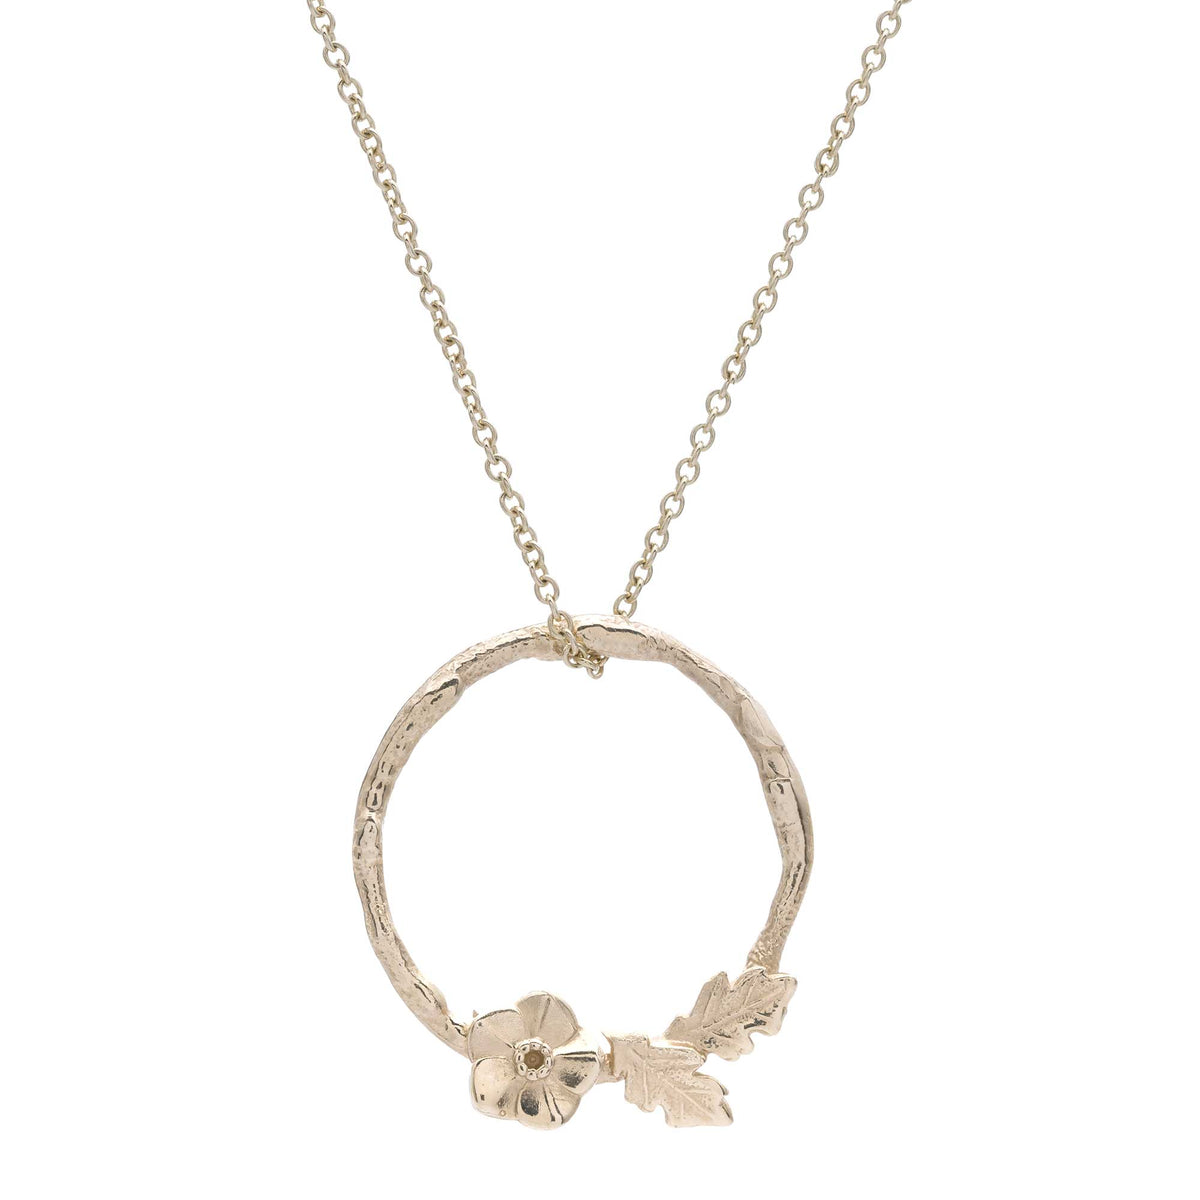 Forget me not wreath solid gold necklace flower pendant RHS Chelsea Flower Show